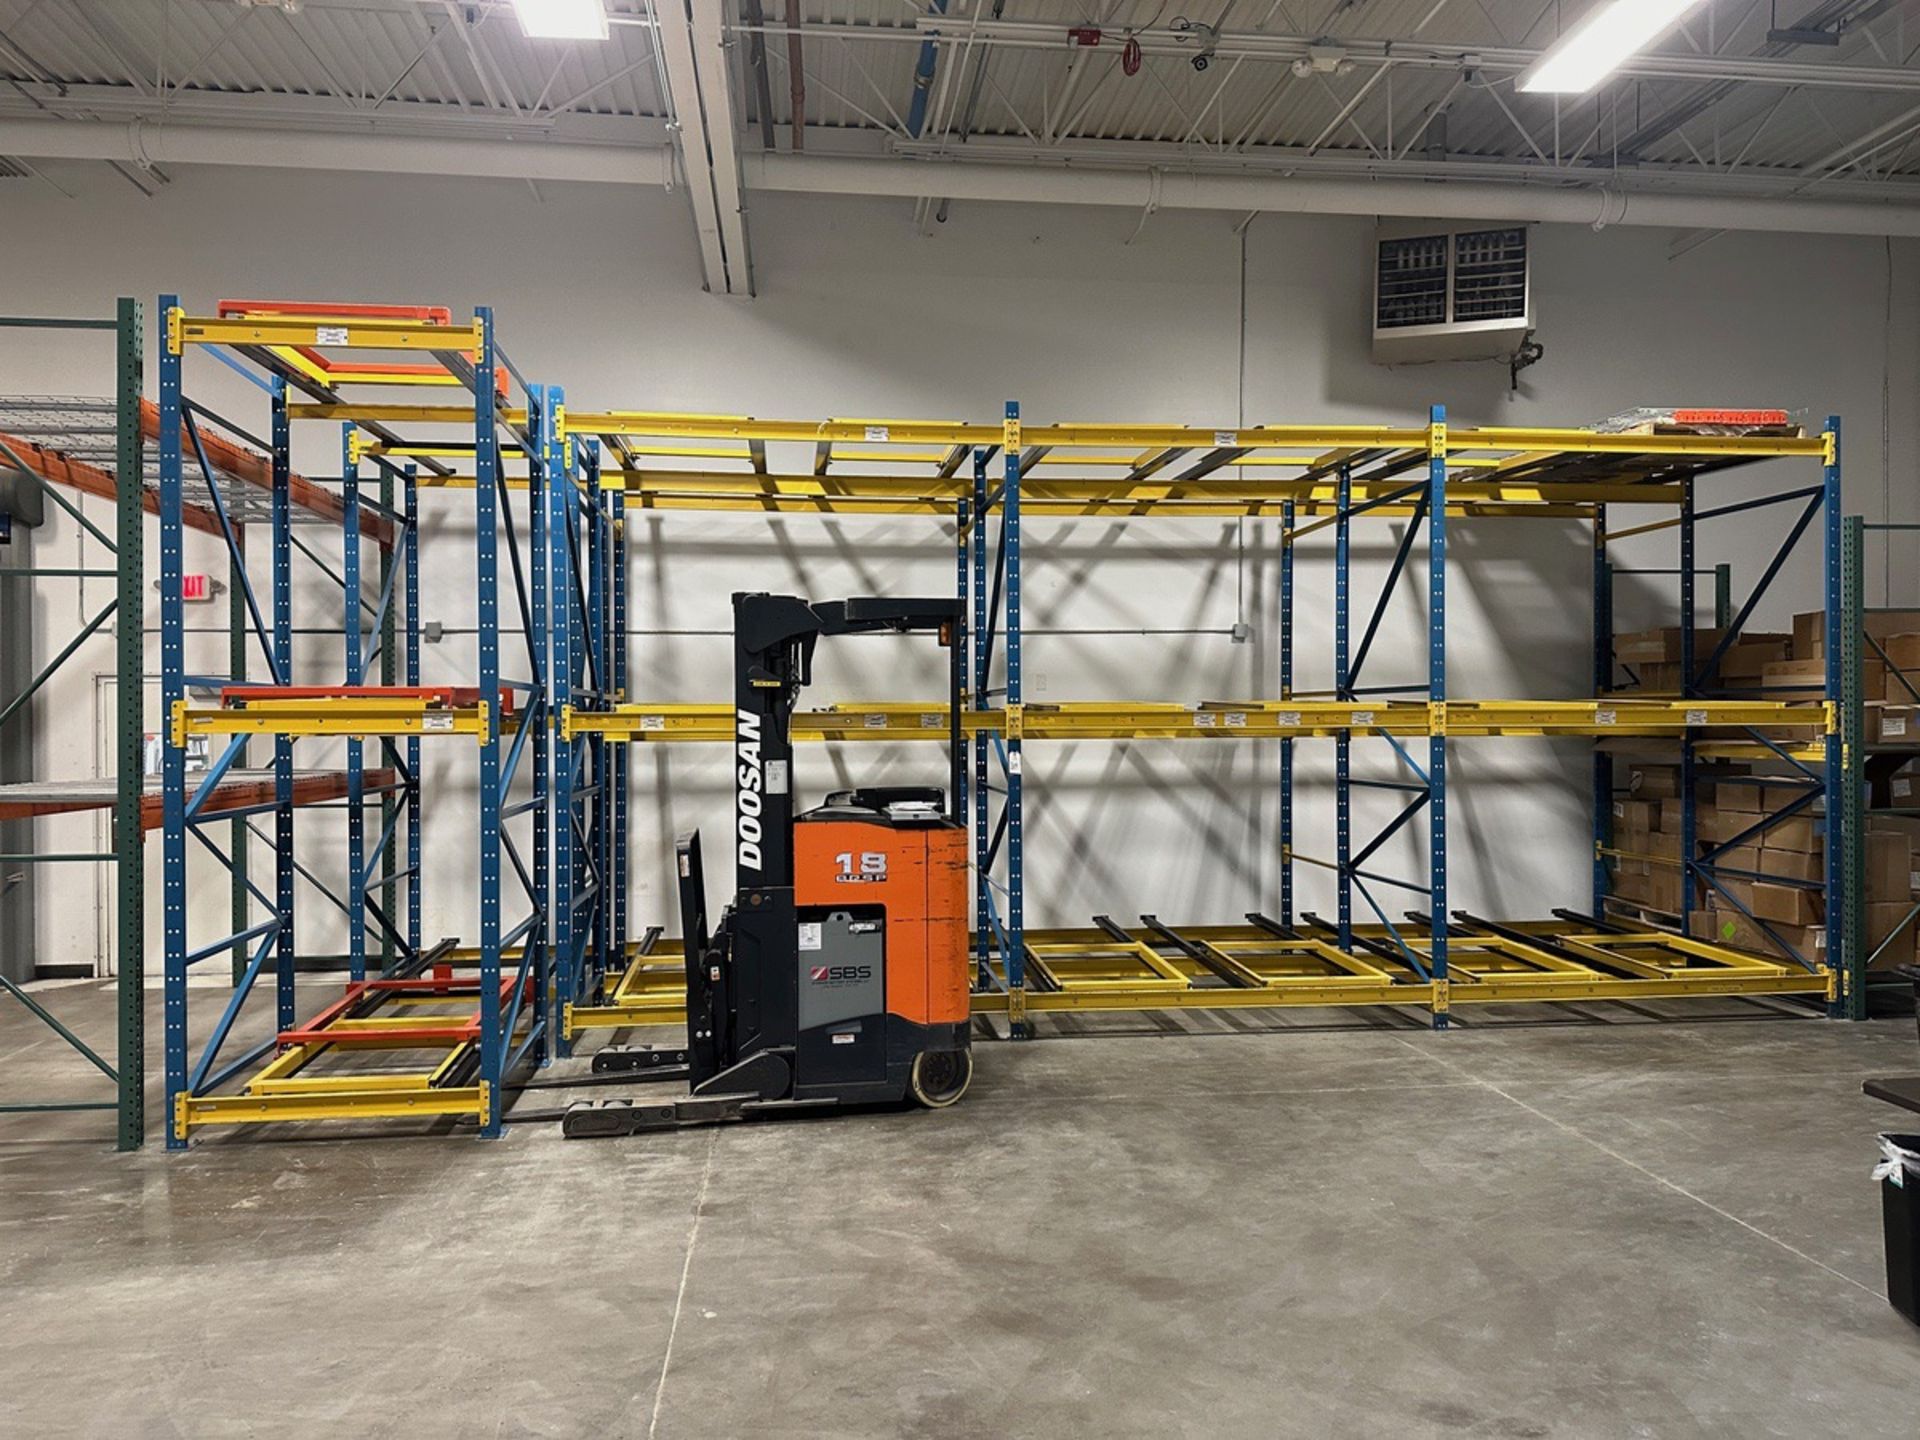 Lot of Gravity Pallet Racking (2 Bays Deep) - (4) 12' x 8' Uprights - (2) 12' x 12' | Rig Fee $1200